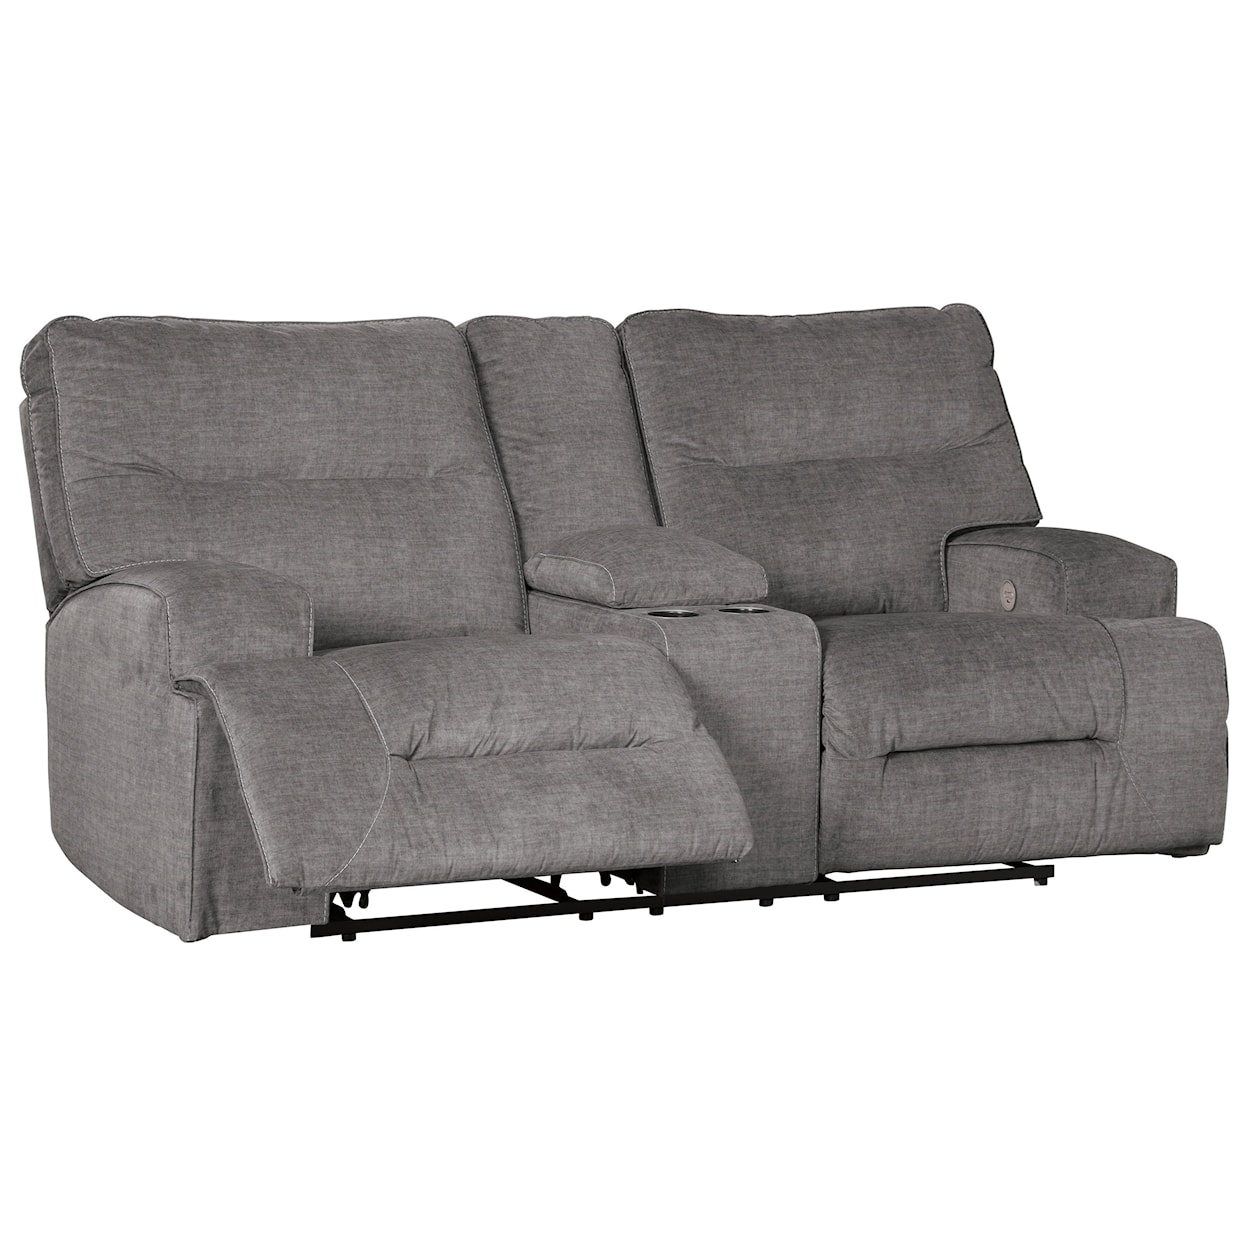 Benchcraft Coombs Ashh 4530296 Contemporary Double Reclining Power